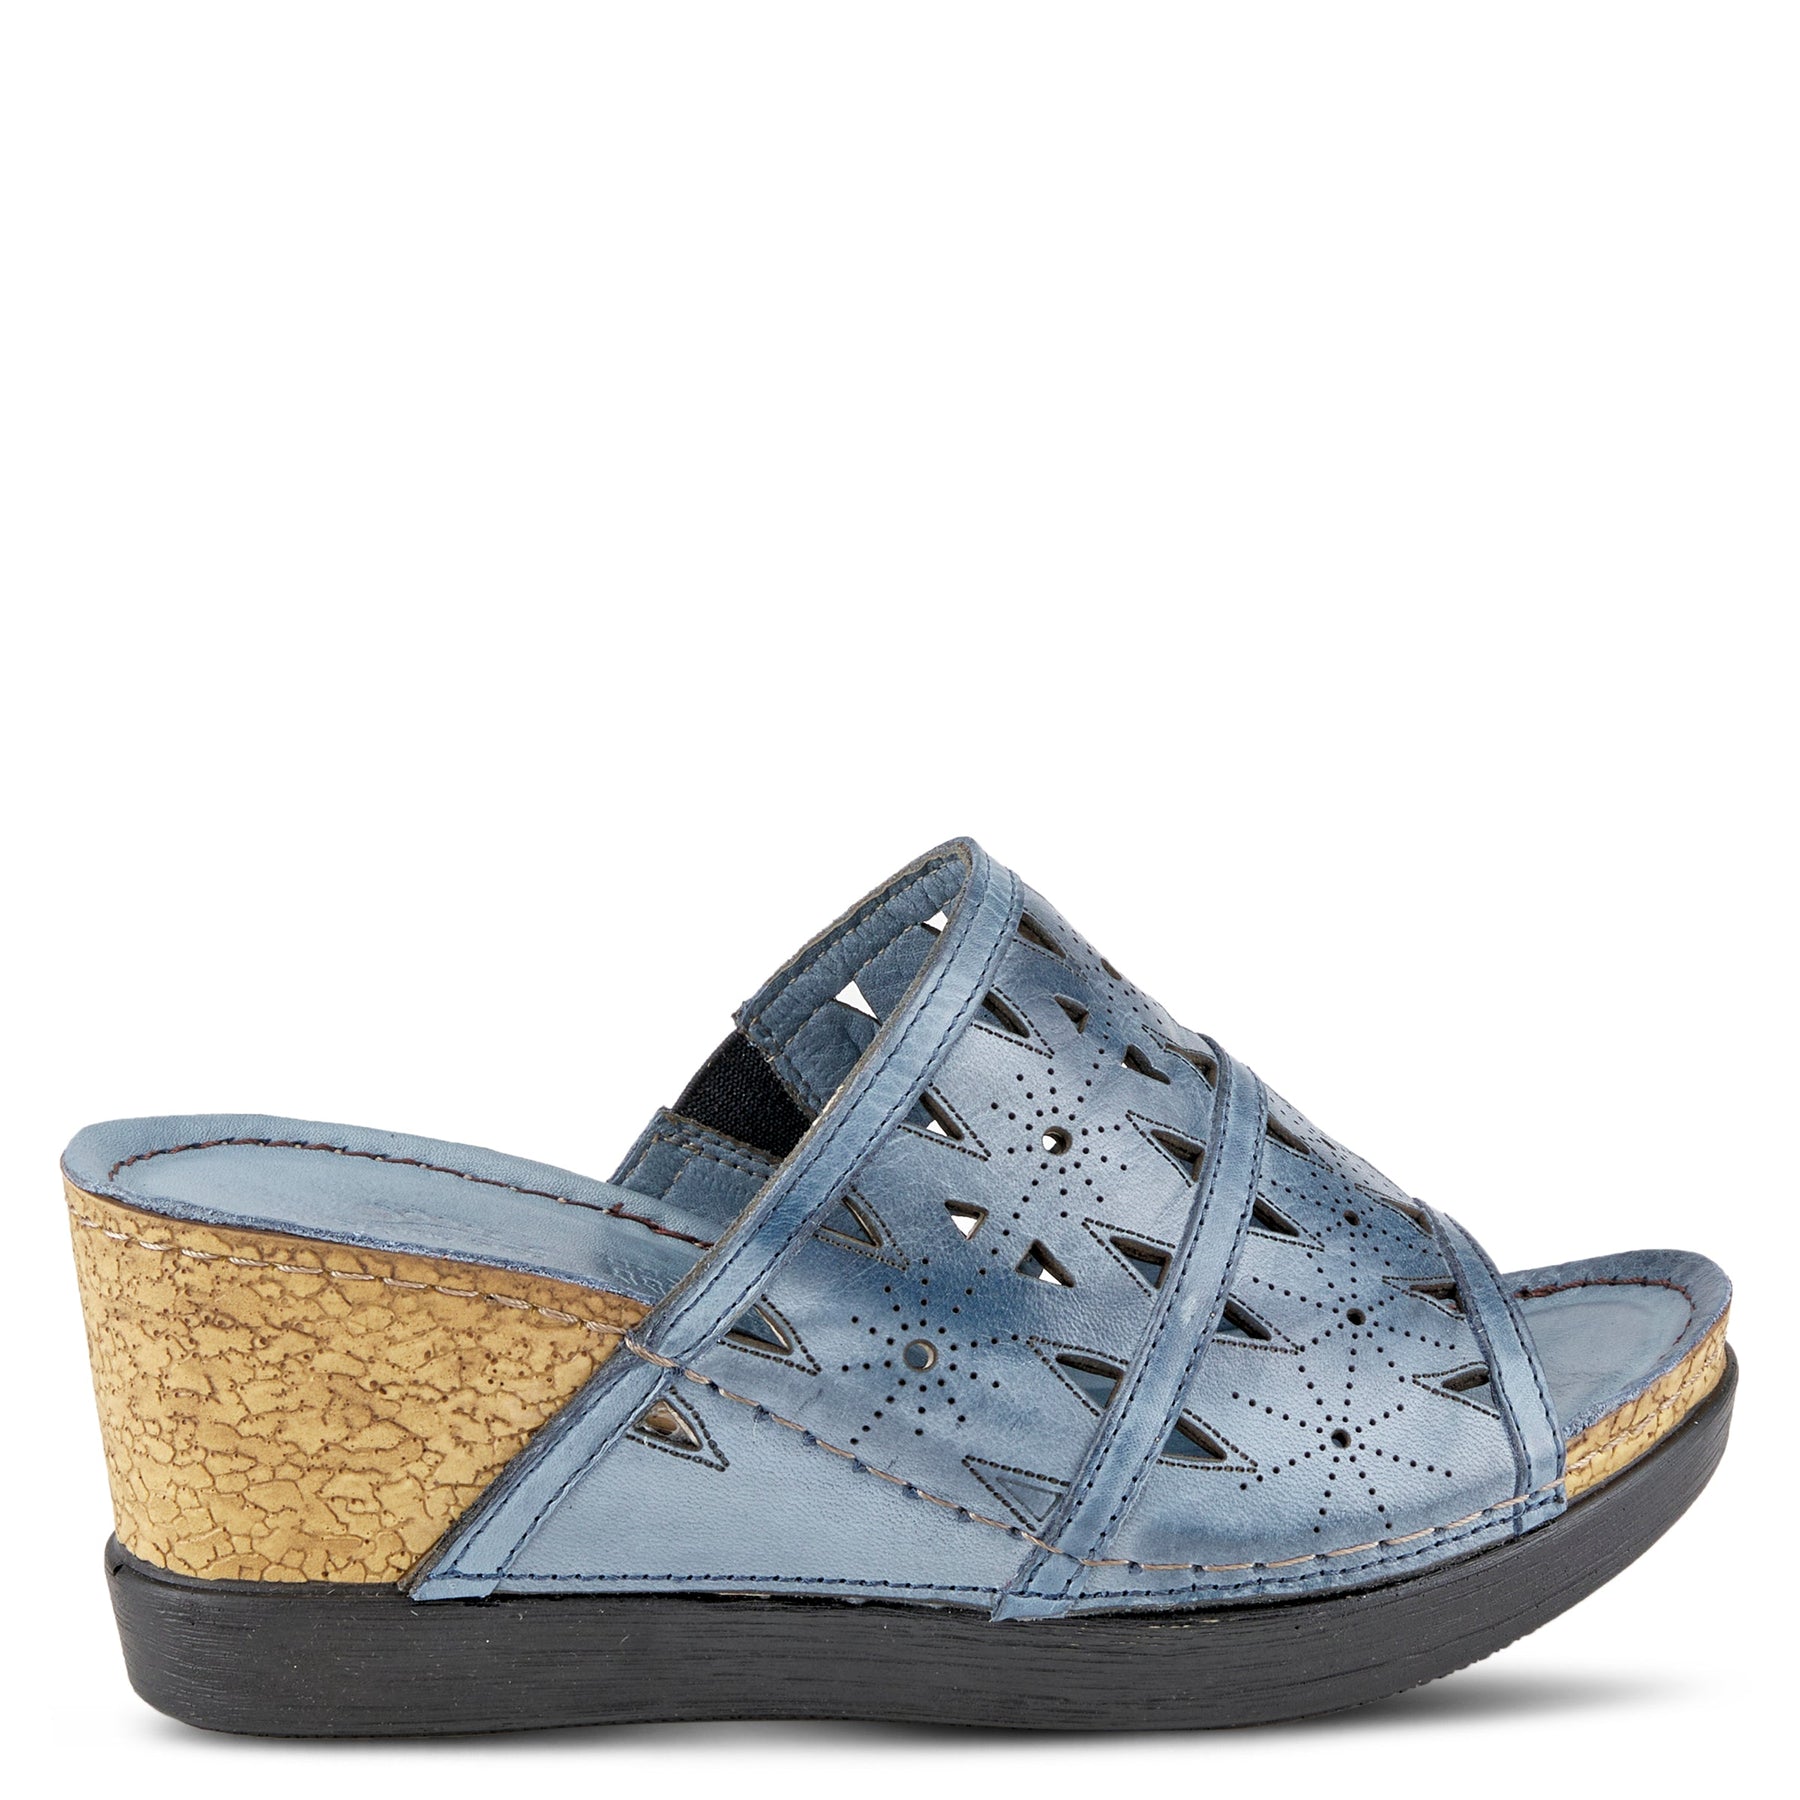 FUSAWEDGE SANDAL by SPRING STEP – Spring Step Shoes